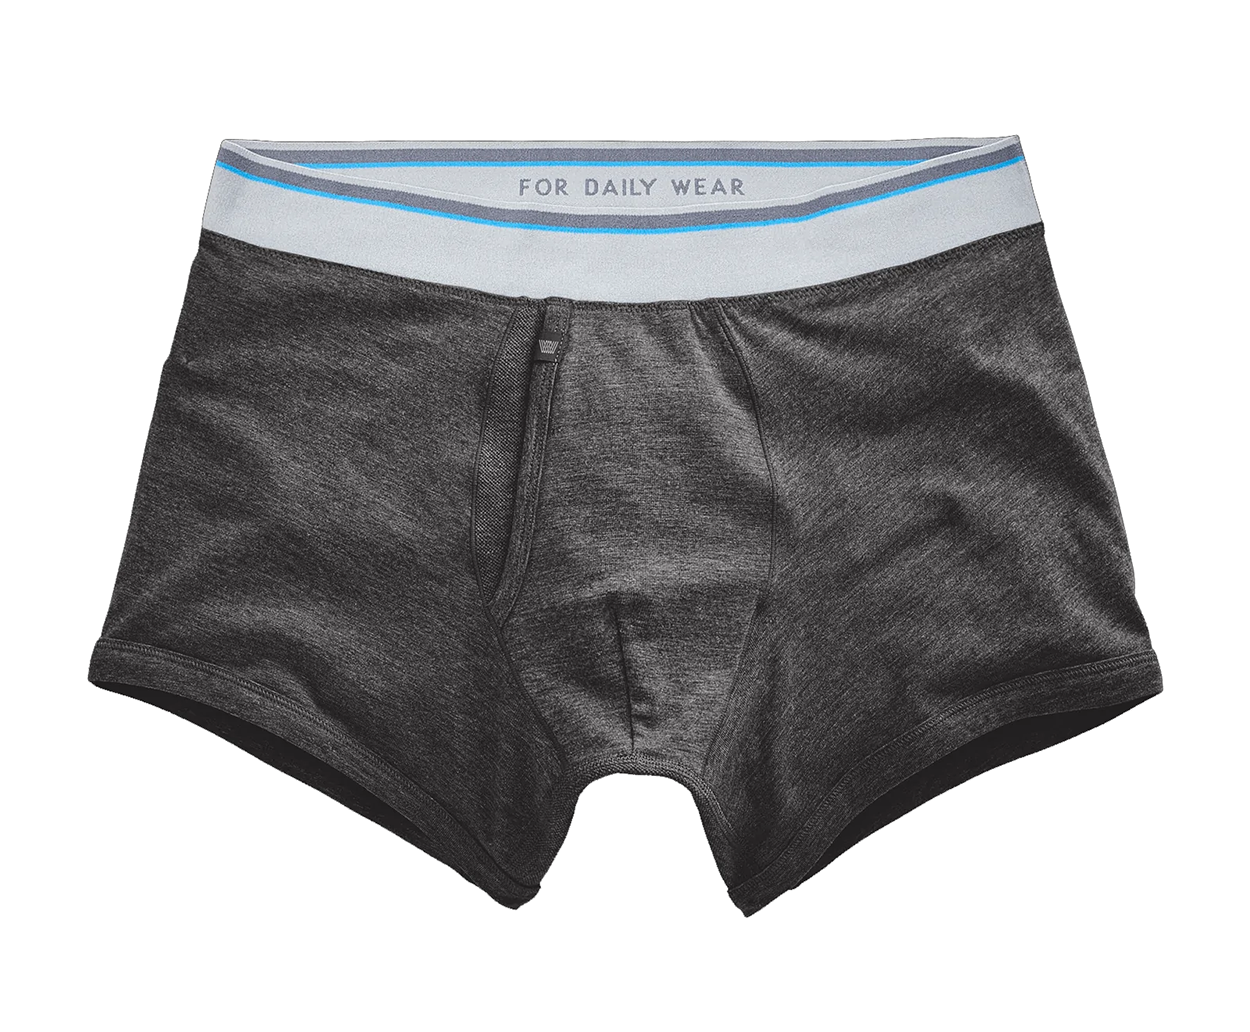 Mack Weldon 18-Hour Jersey Boxer Brief - No Fear Red